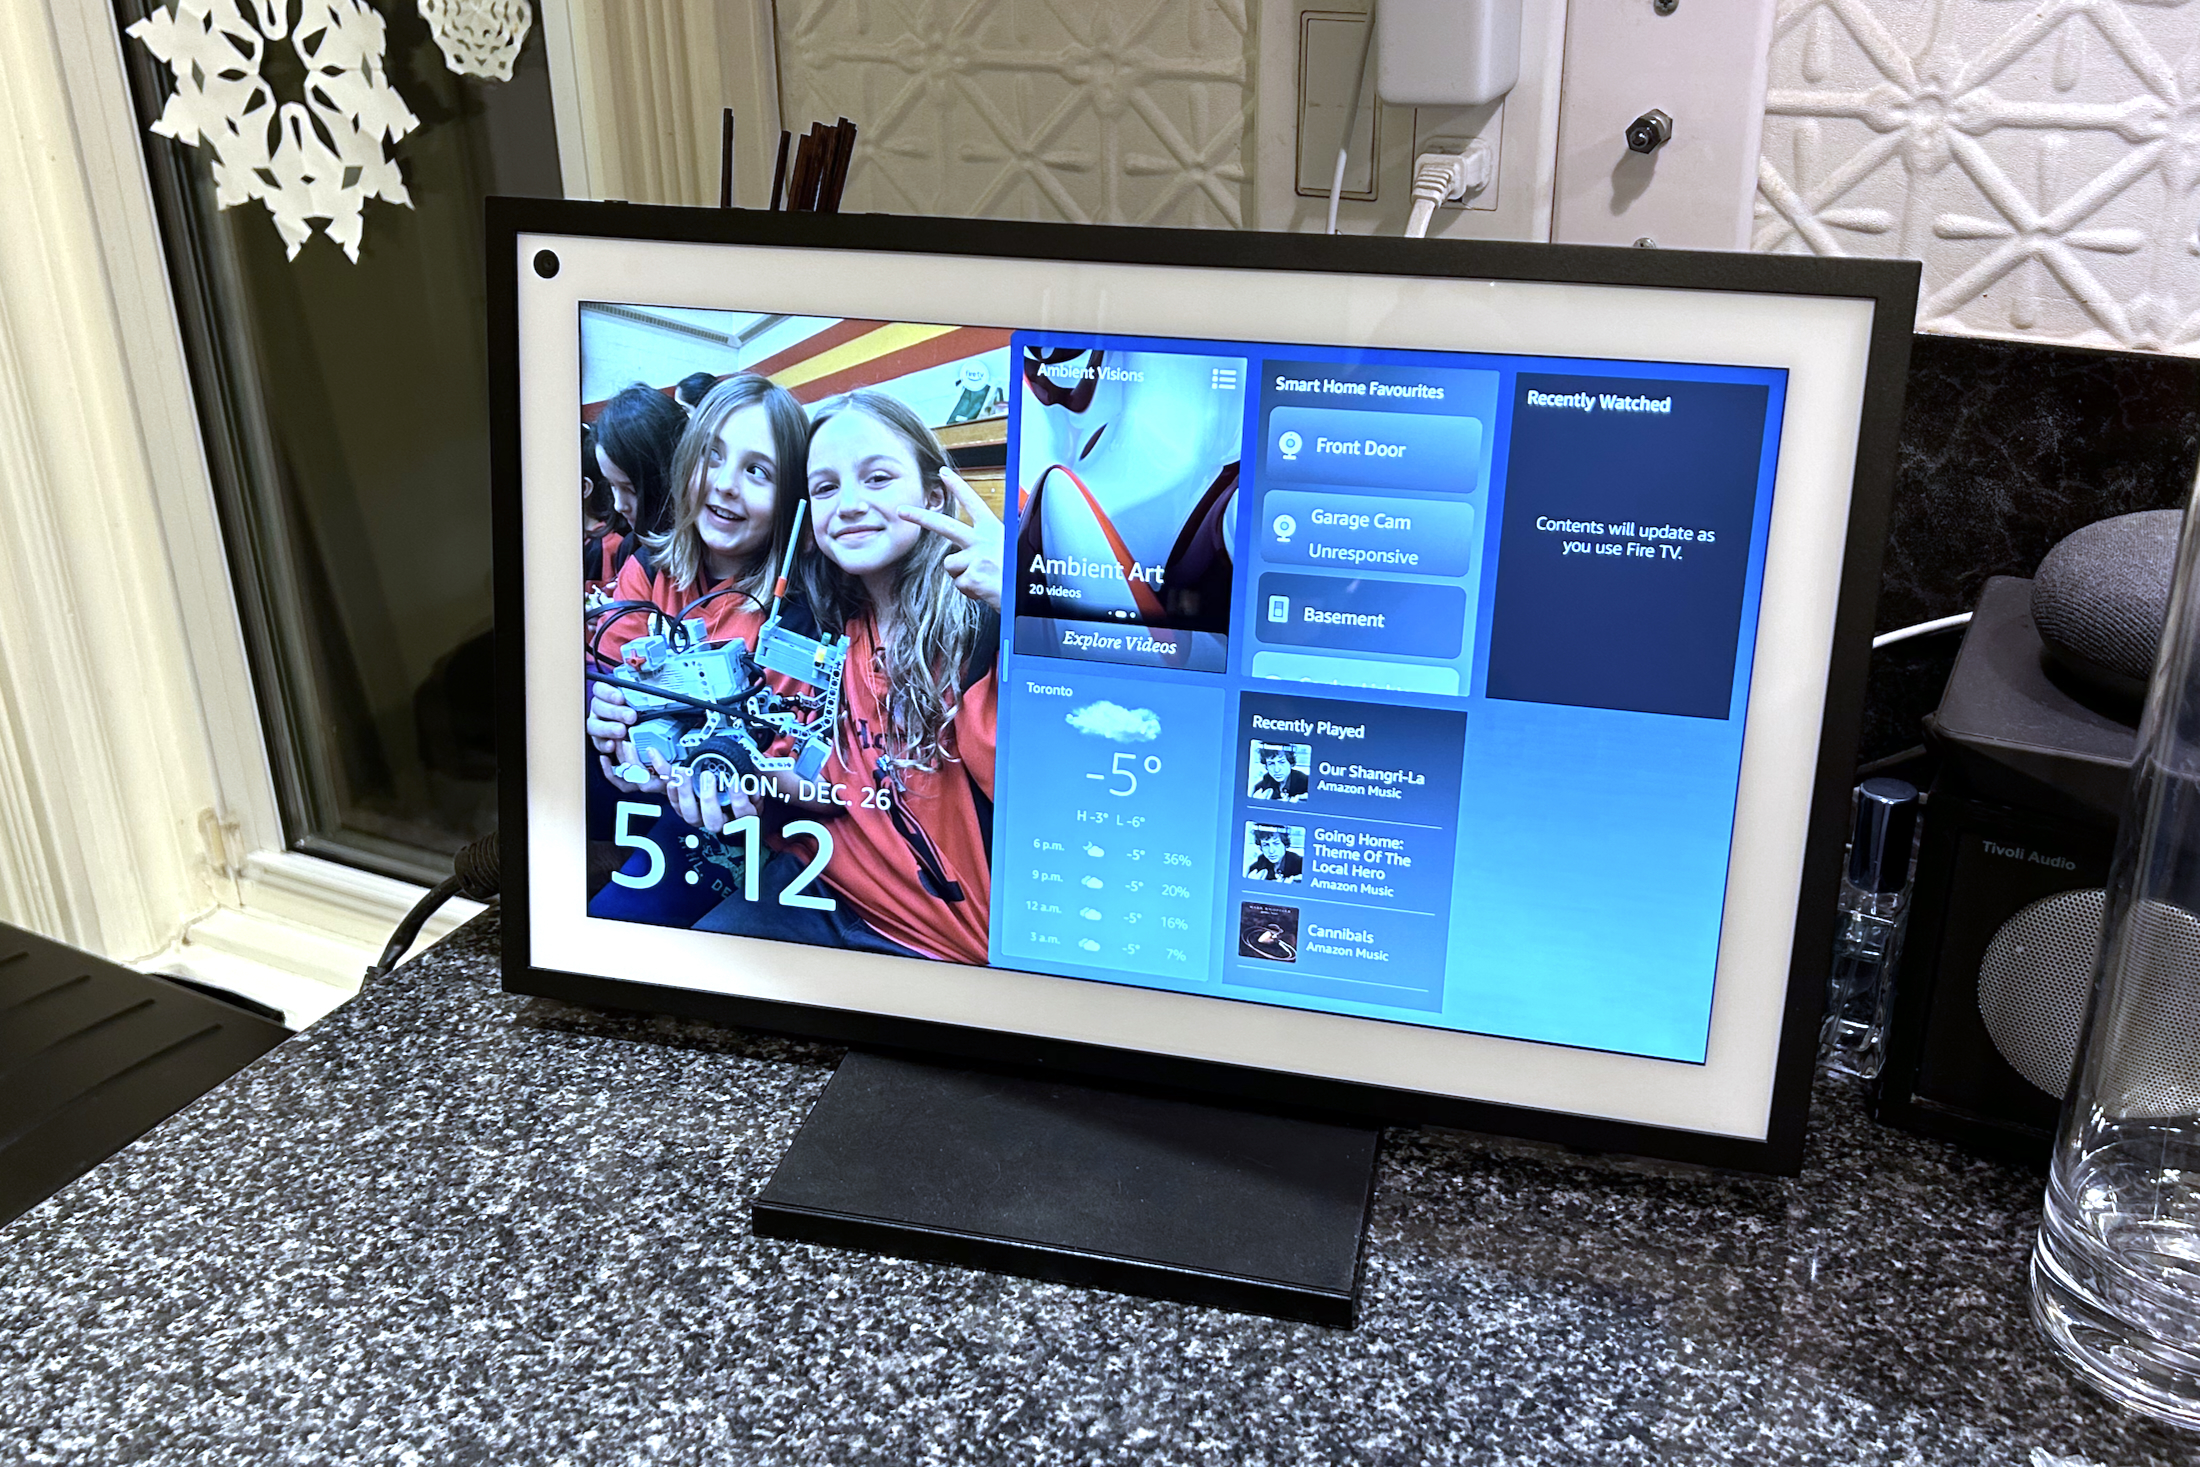 I replaced my kitchen TV with an Echo Show 15 and I kinda liked it